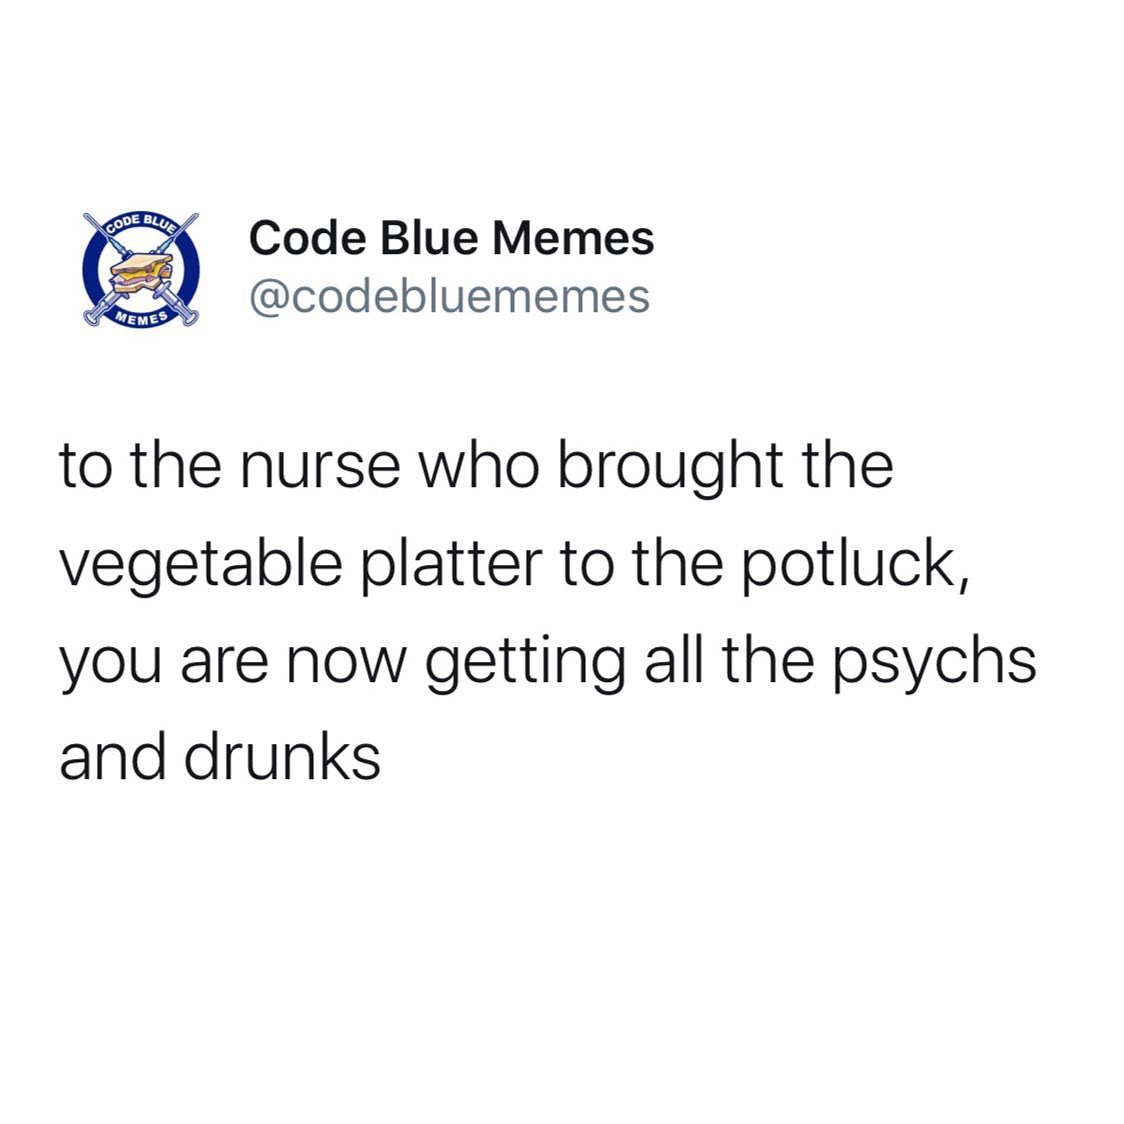 angle - Code B Code Blue Memes to the nurse who brought the vegetable platter to the potluck, you are now getting all the psychs and drunks